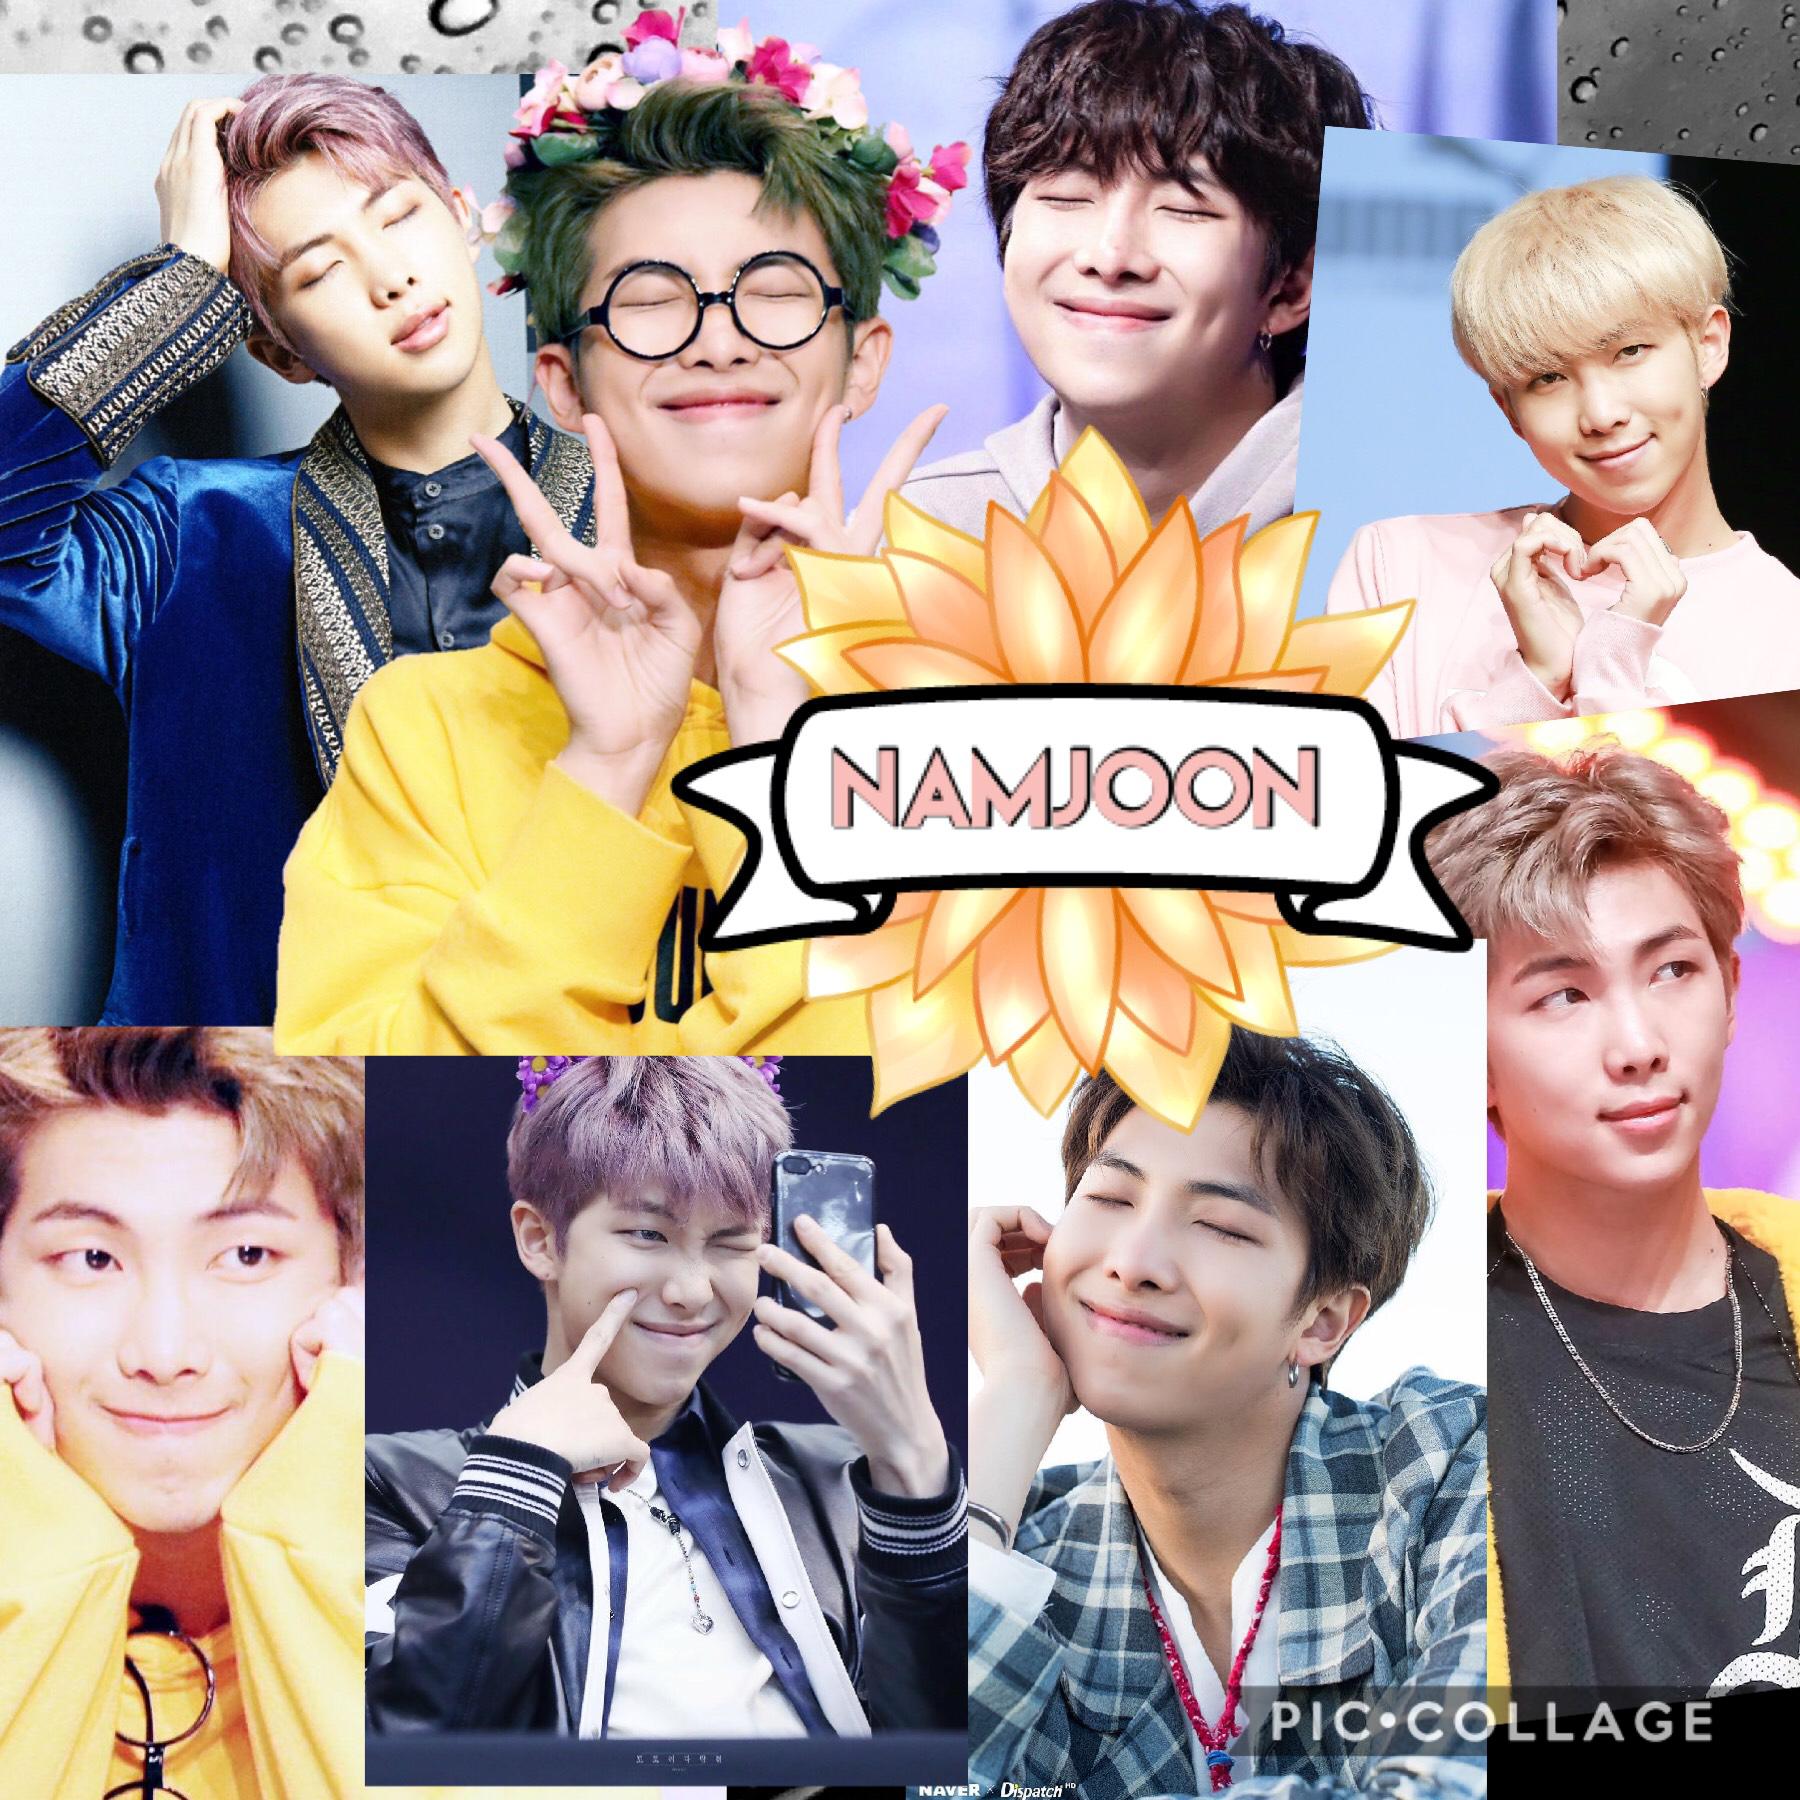 Namjoon is such a deep soul with such a cute face 😊🌈❤️